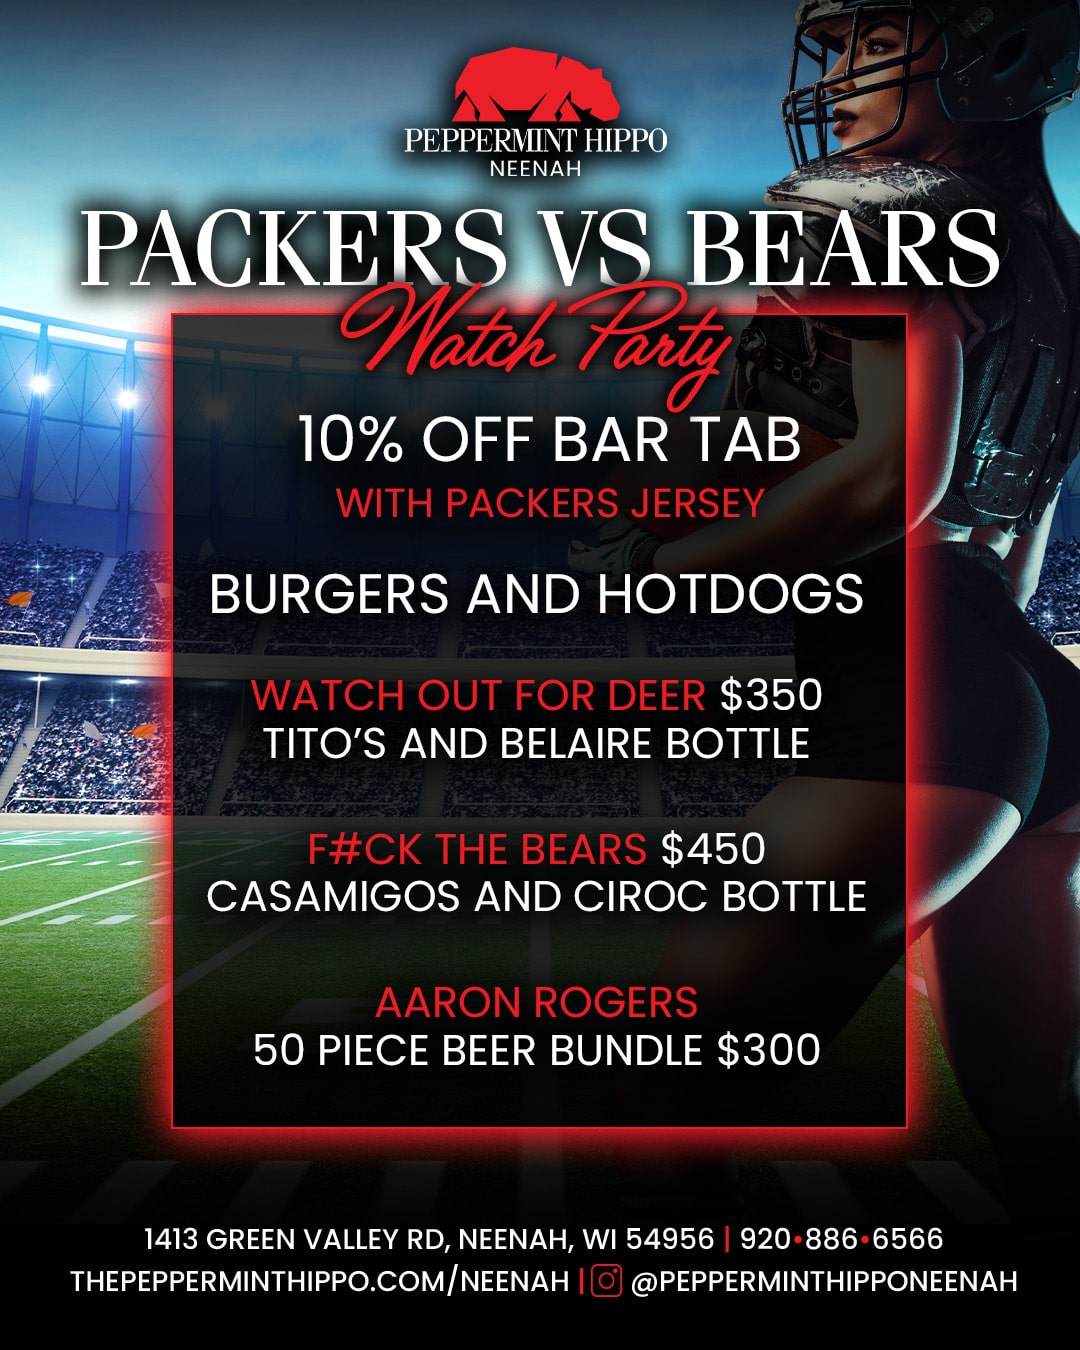 Packers vs Bears Watch Party at Peppermint Hippo Neenah